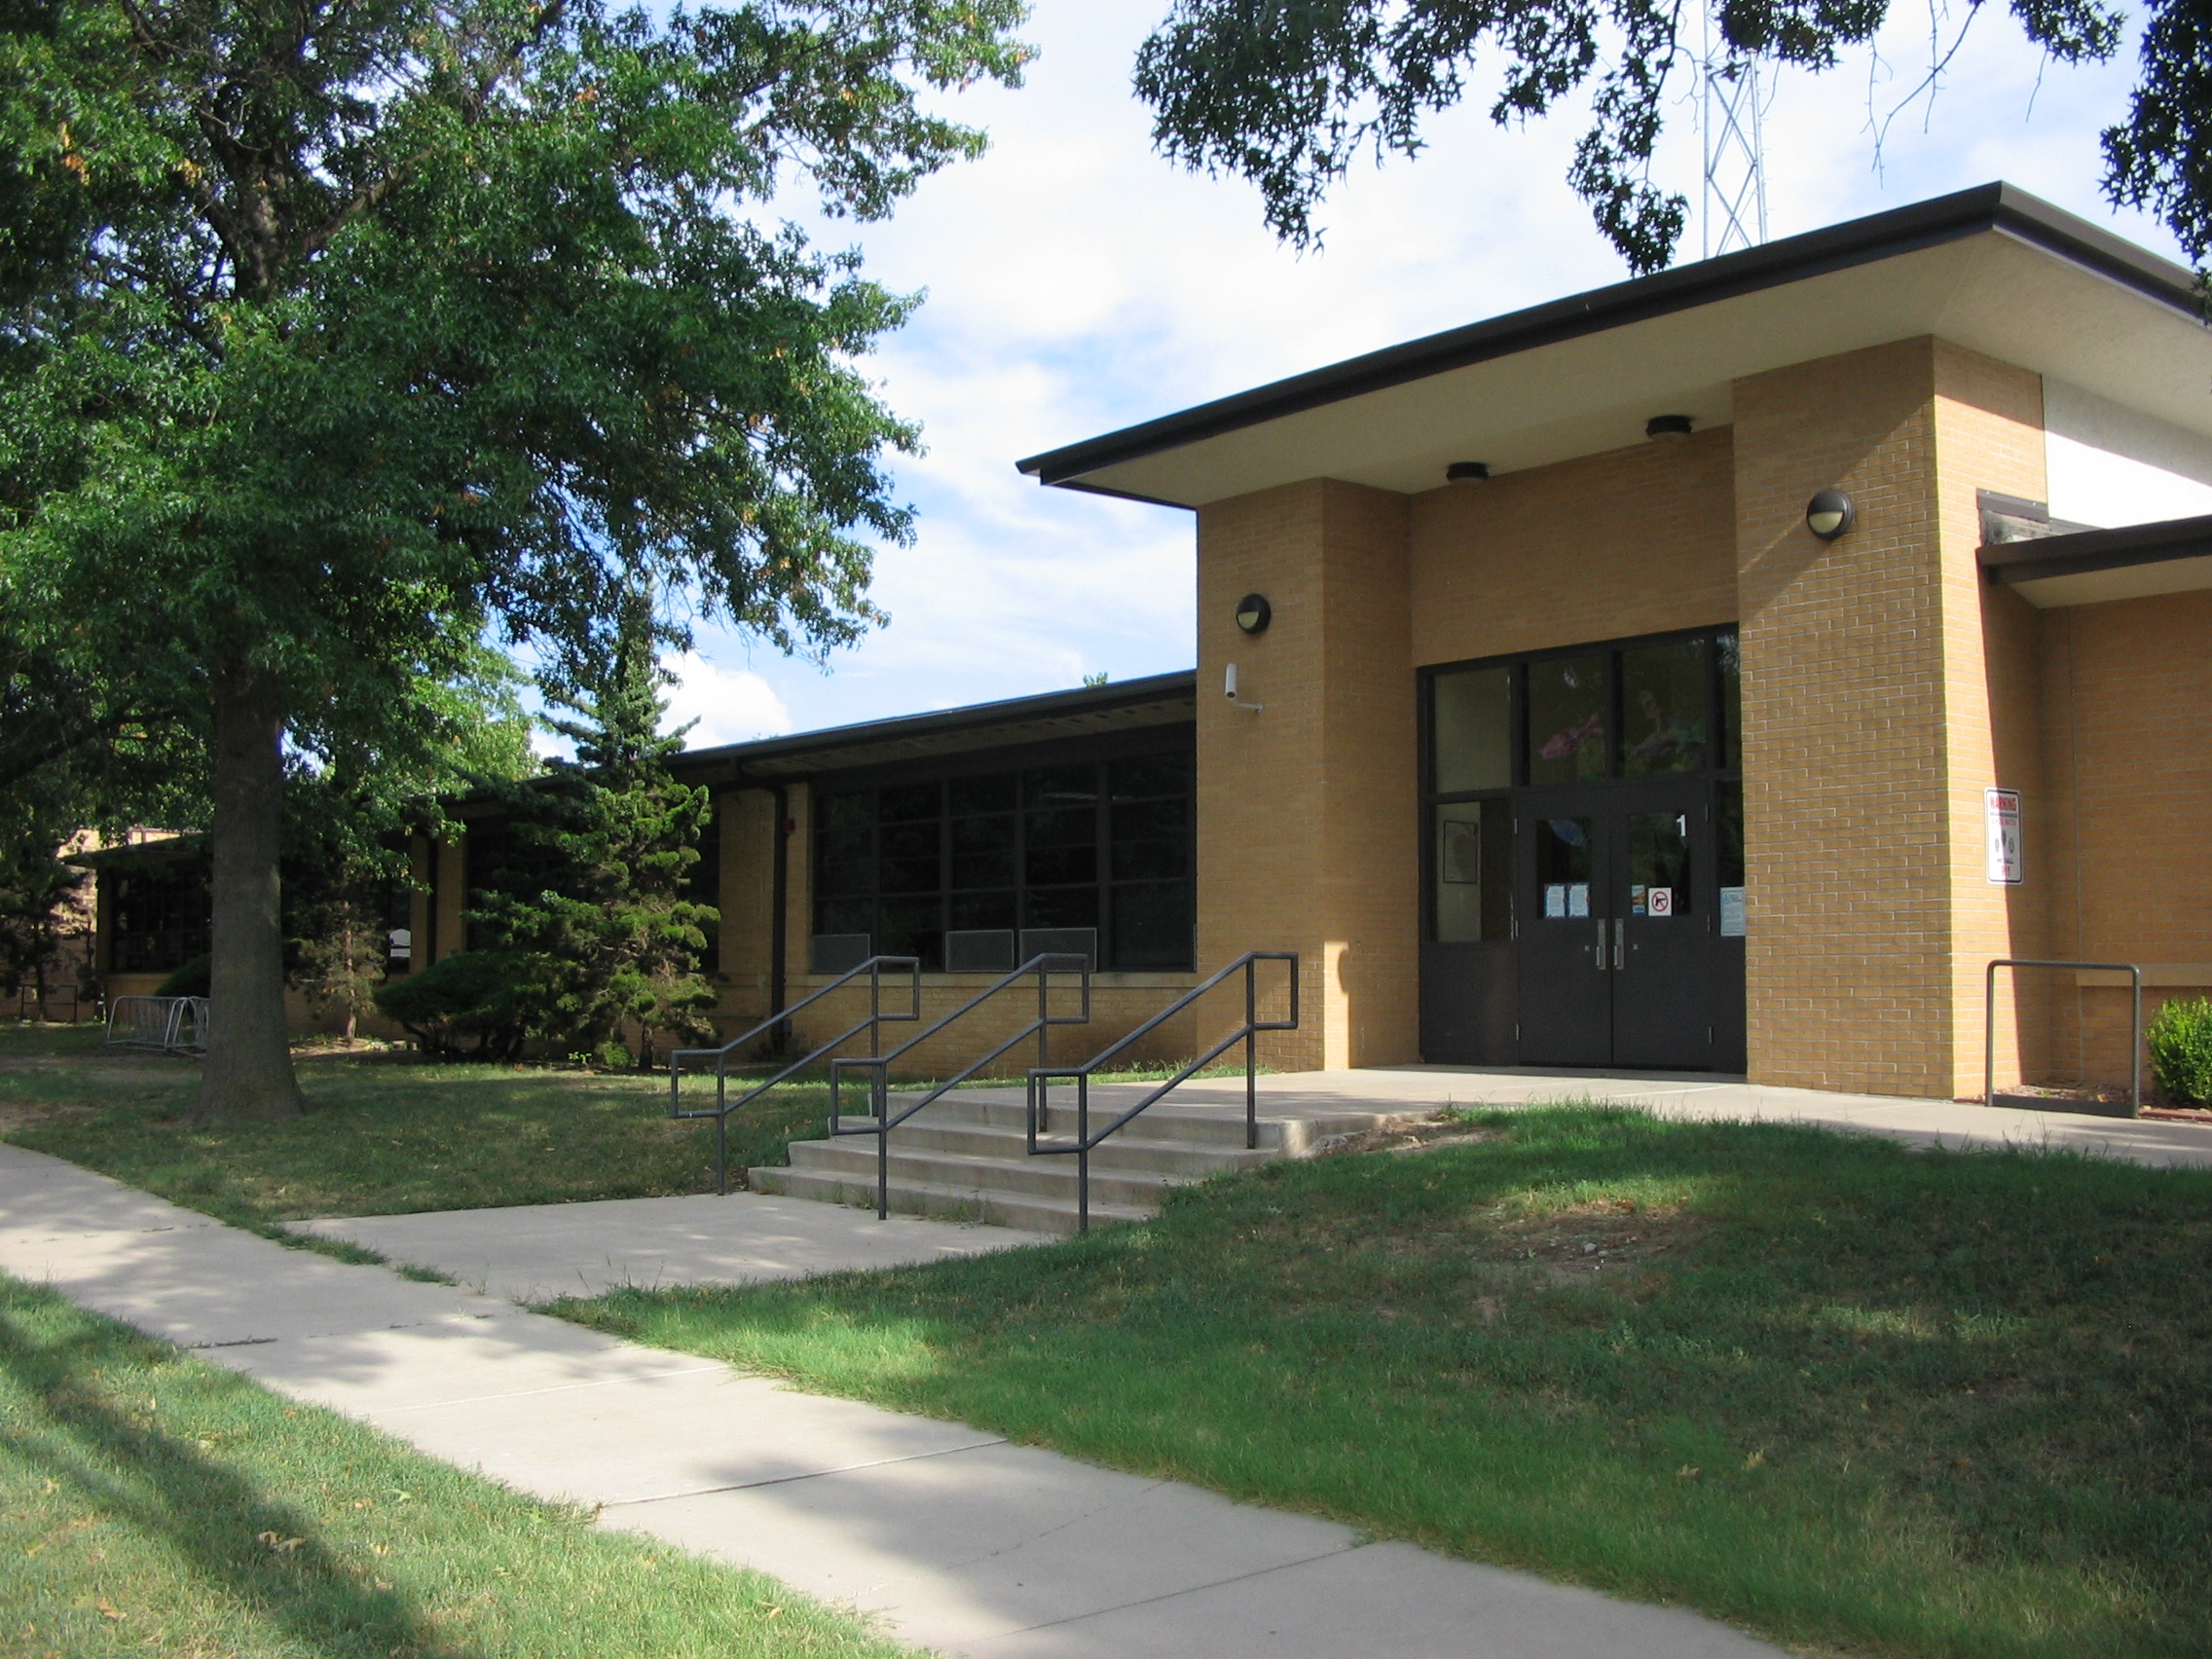 Image of the front of Peterson Elementary School